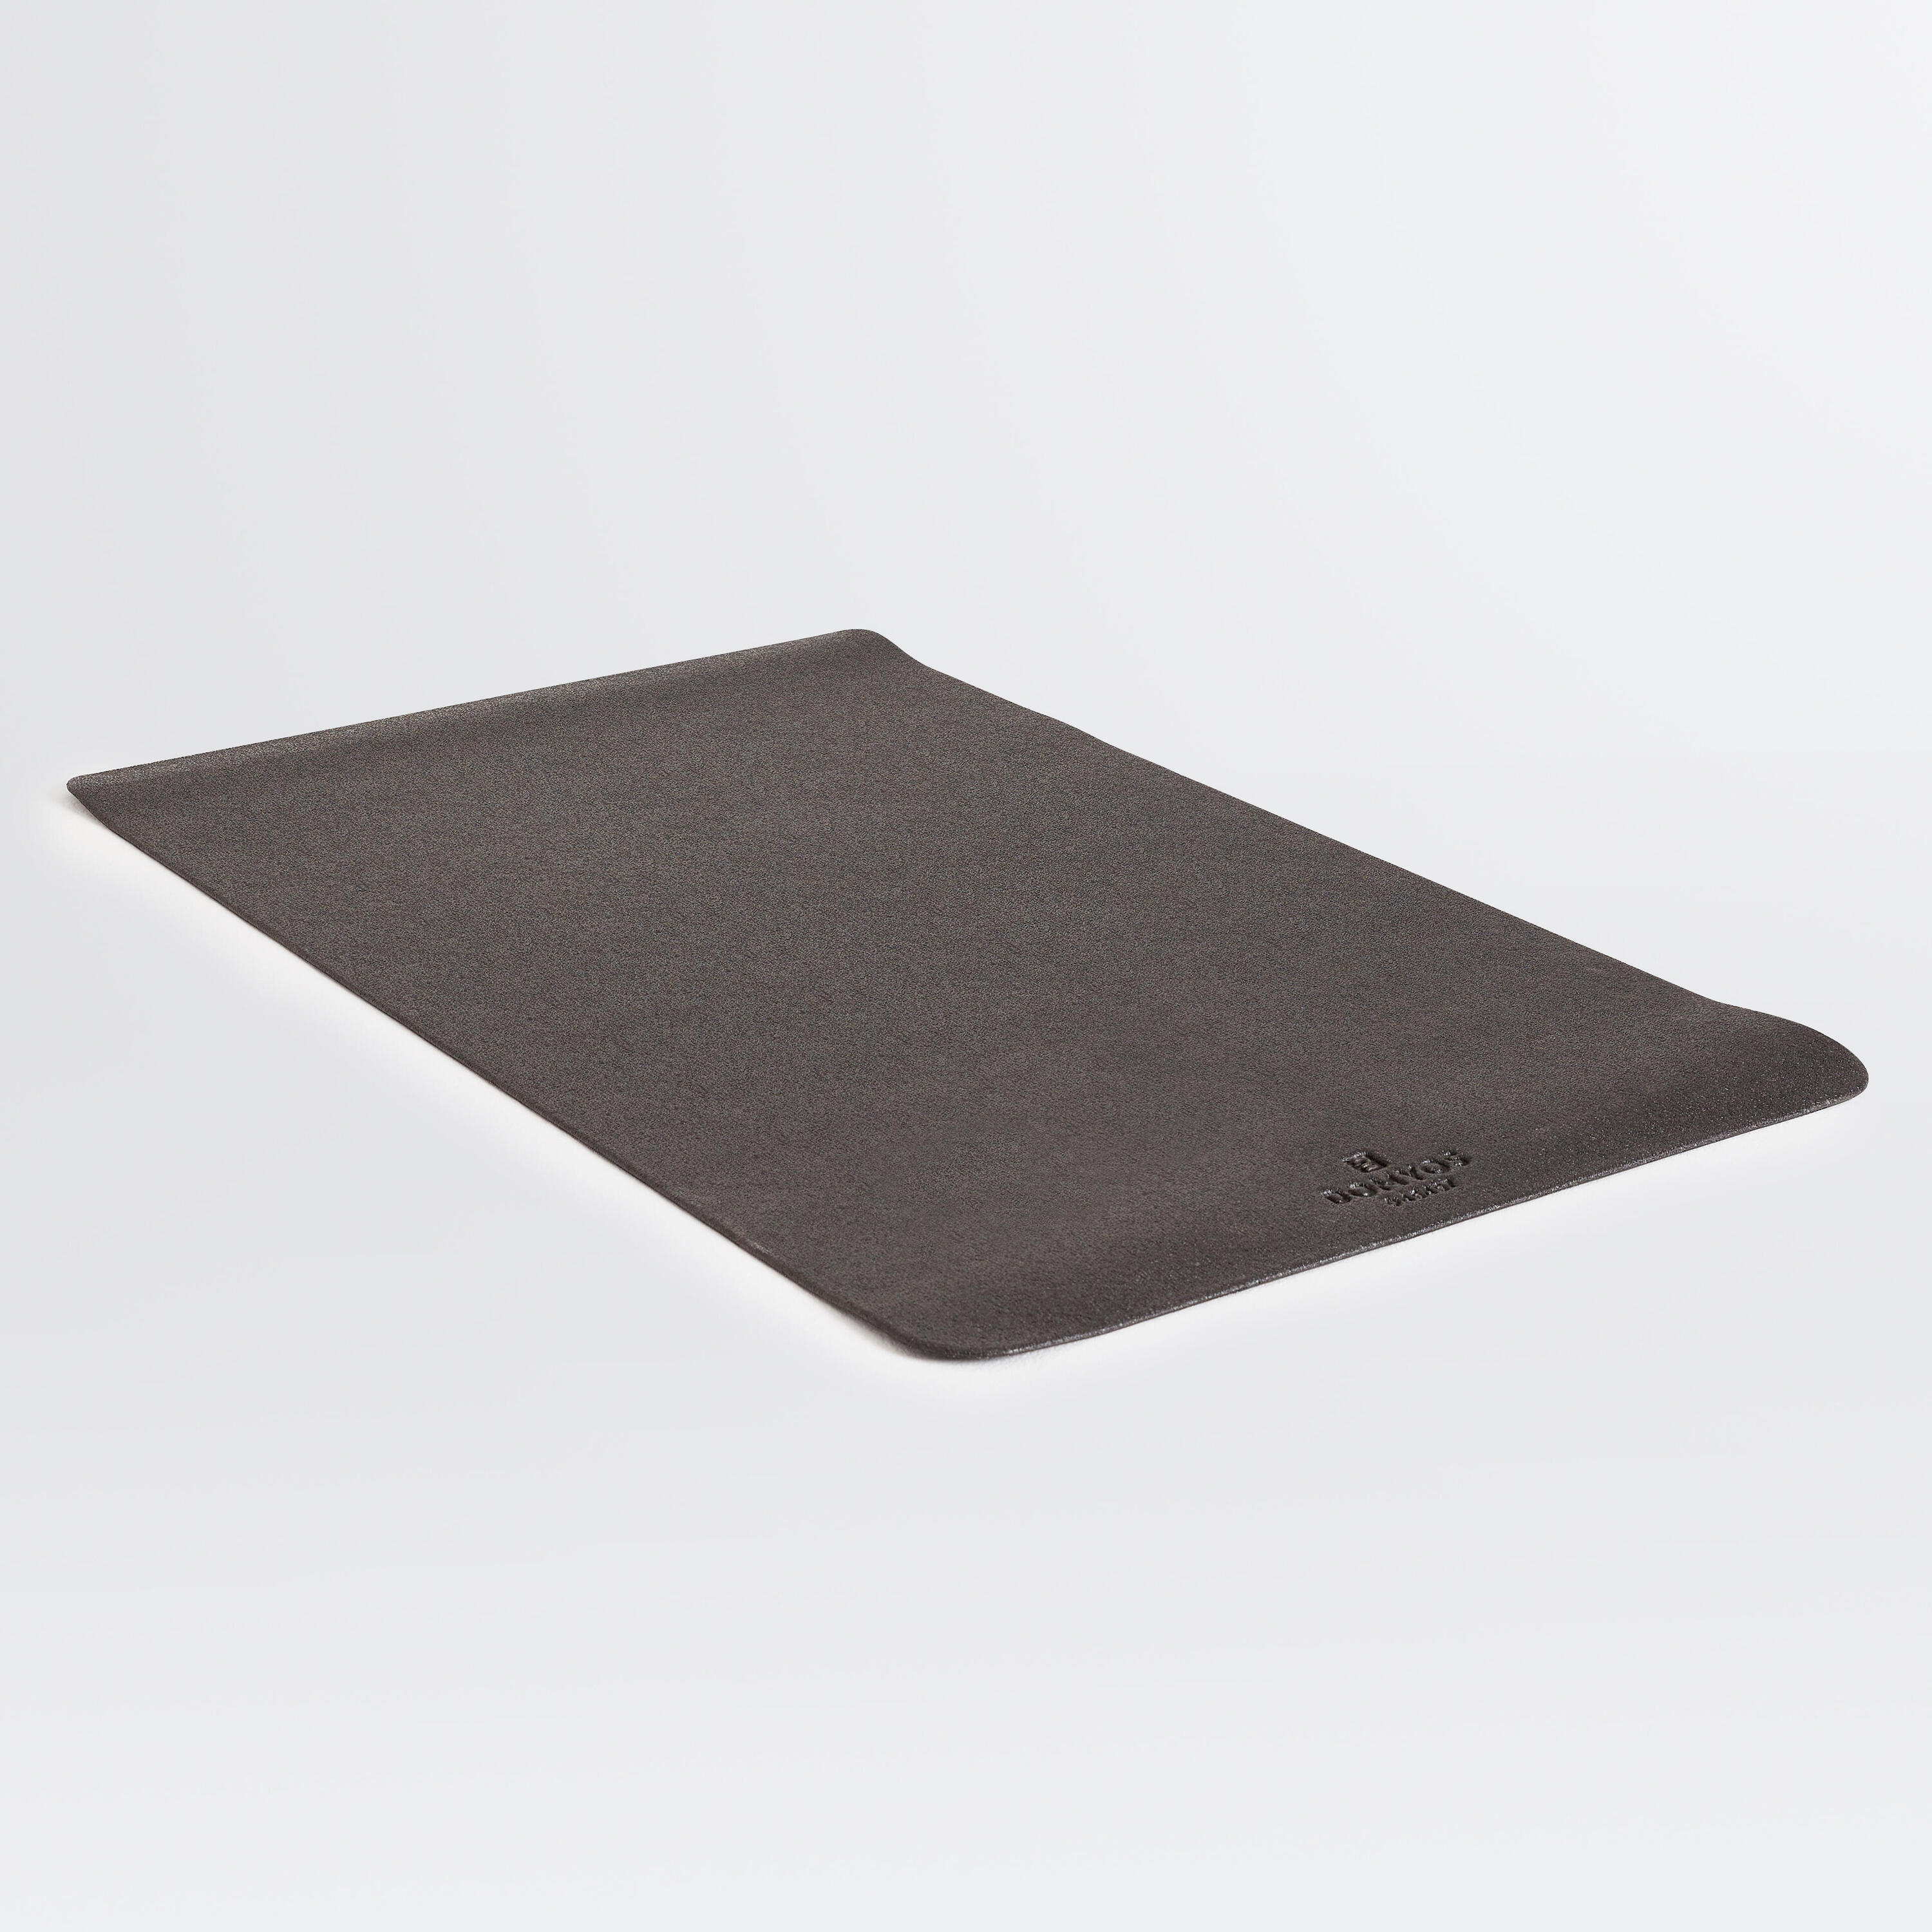 Floor Protection Mat for Fitness Equipment - Size M - 70x110 cm 2/4